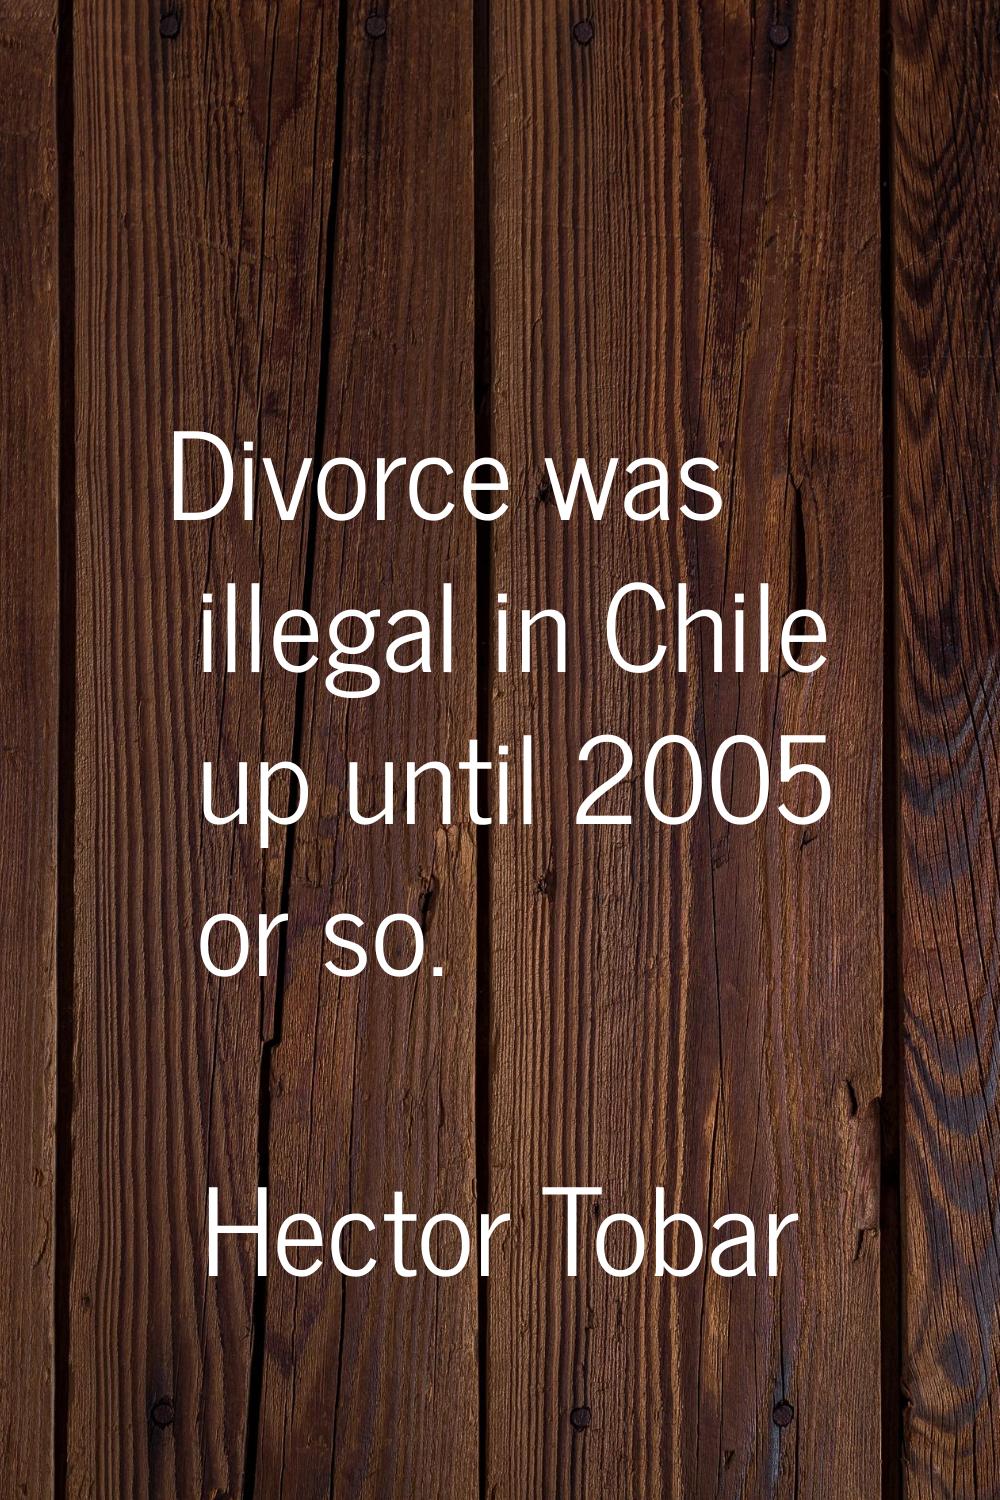 Divorce was illegal in Chile up until 2005 or so.